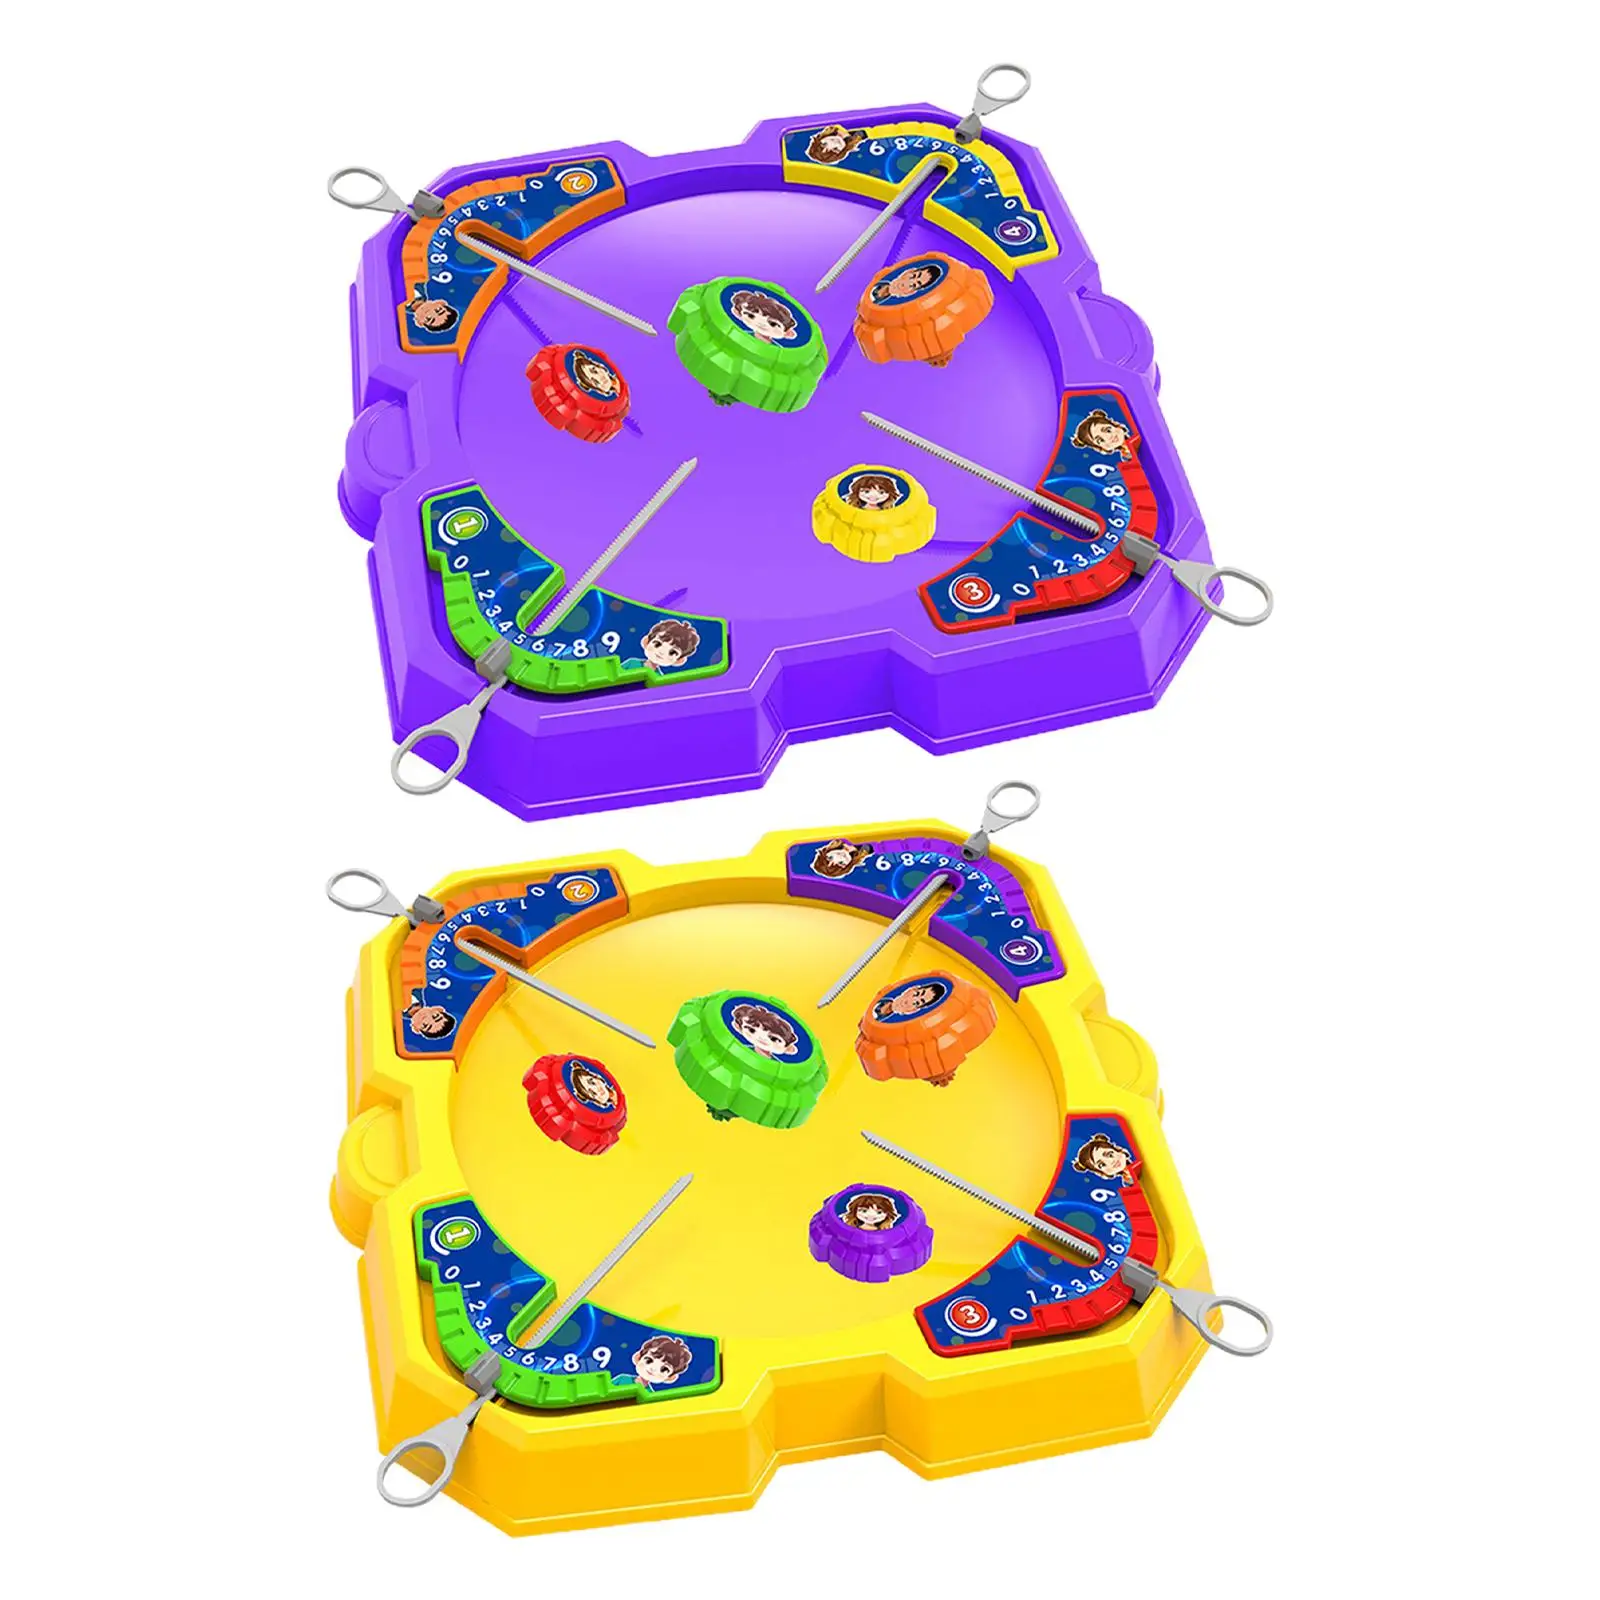 Gyro Playset Activity Toy Wear Resistant Durable for Holiday Parties Kids